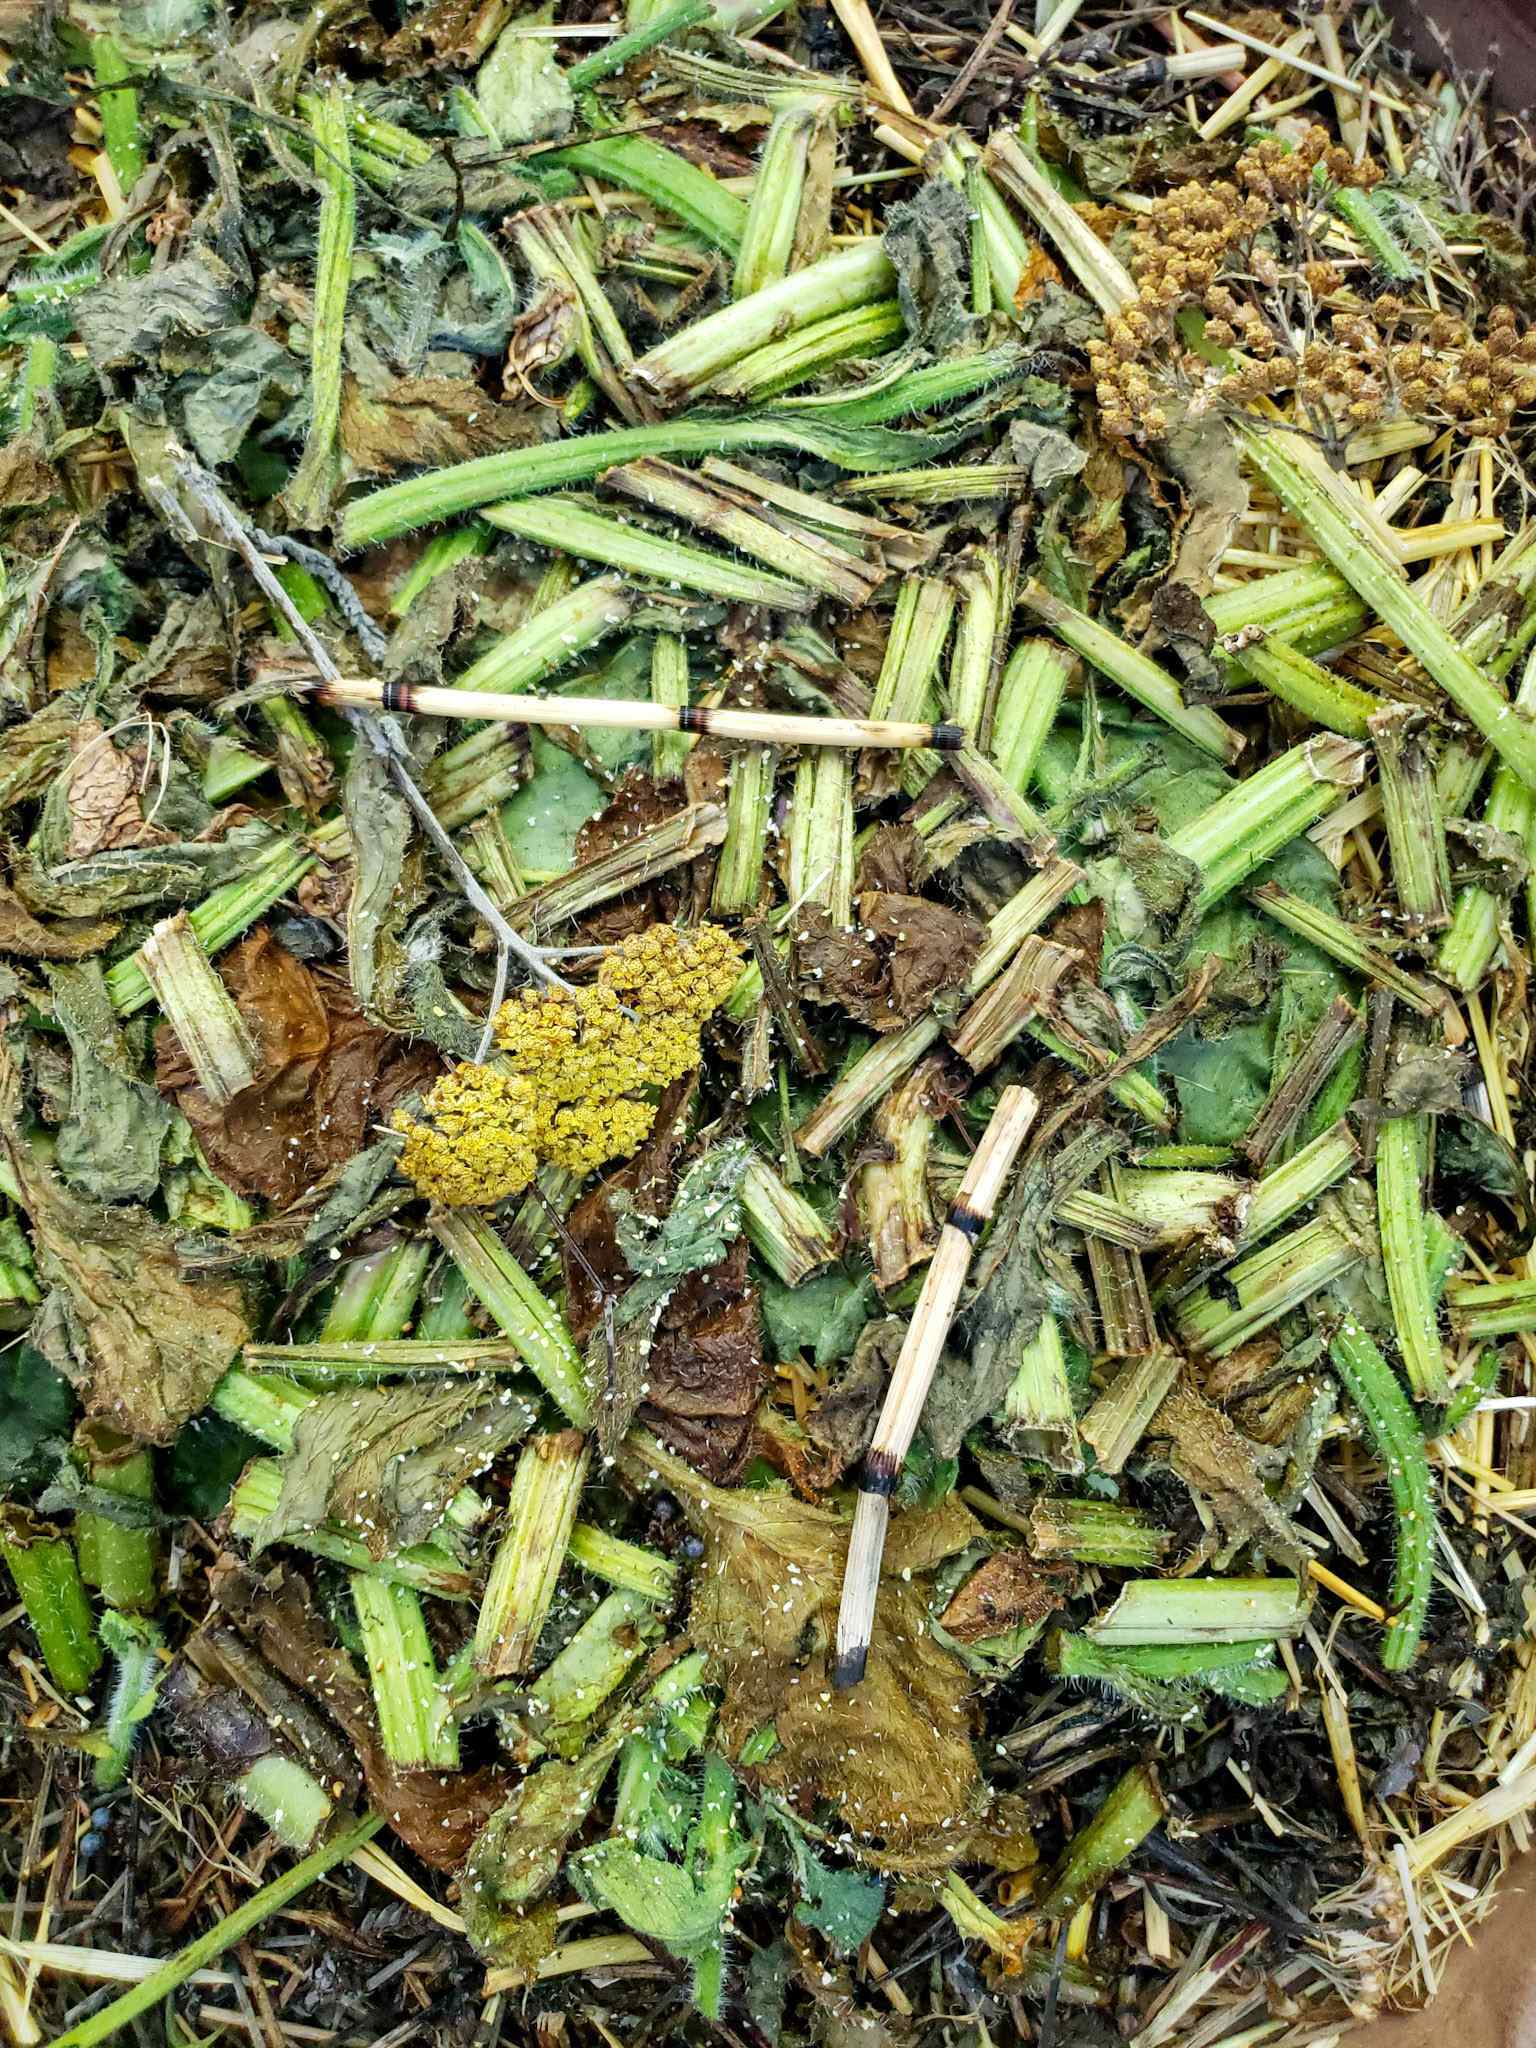 A close up image of green  mulch consisting of fava bean plants, horsetail, yarrow flowers and borage. Some of the mulch is still green in color while other parts have turned more brown. 